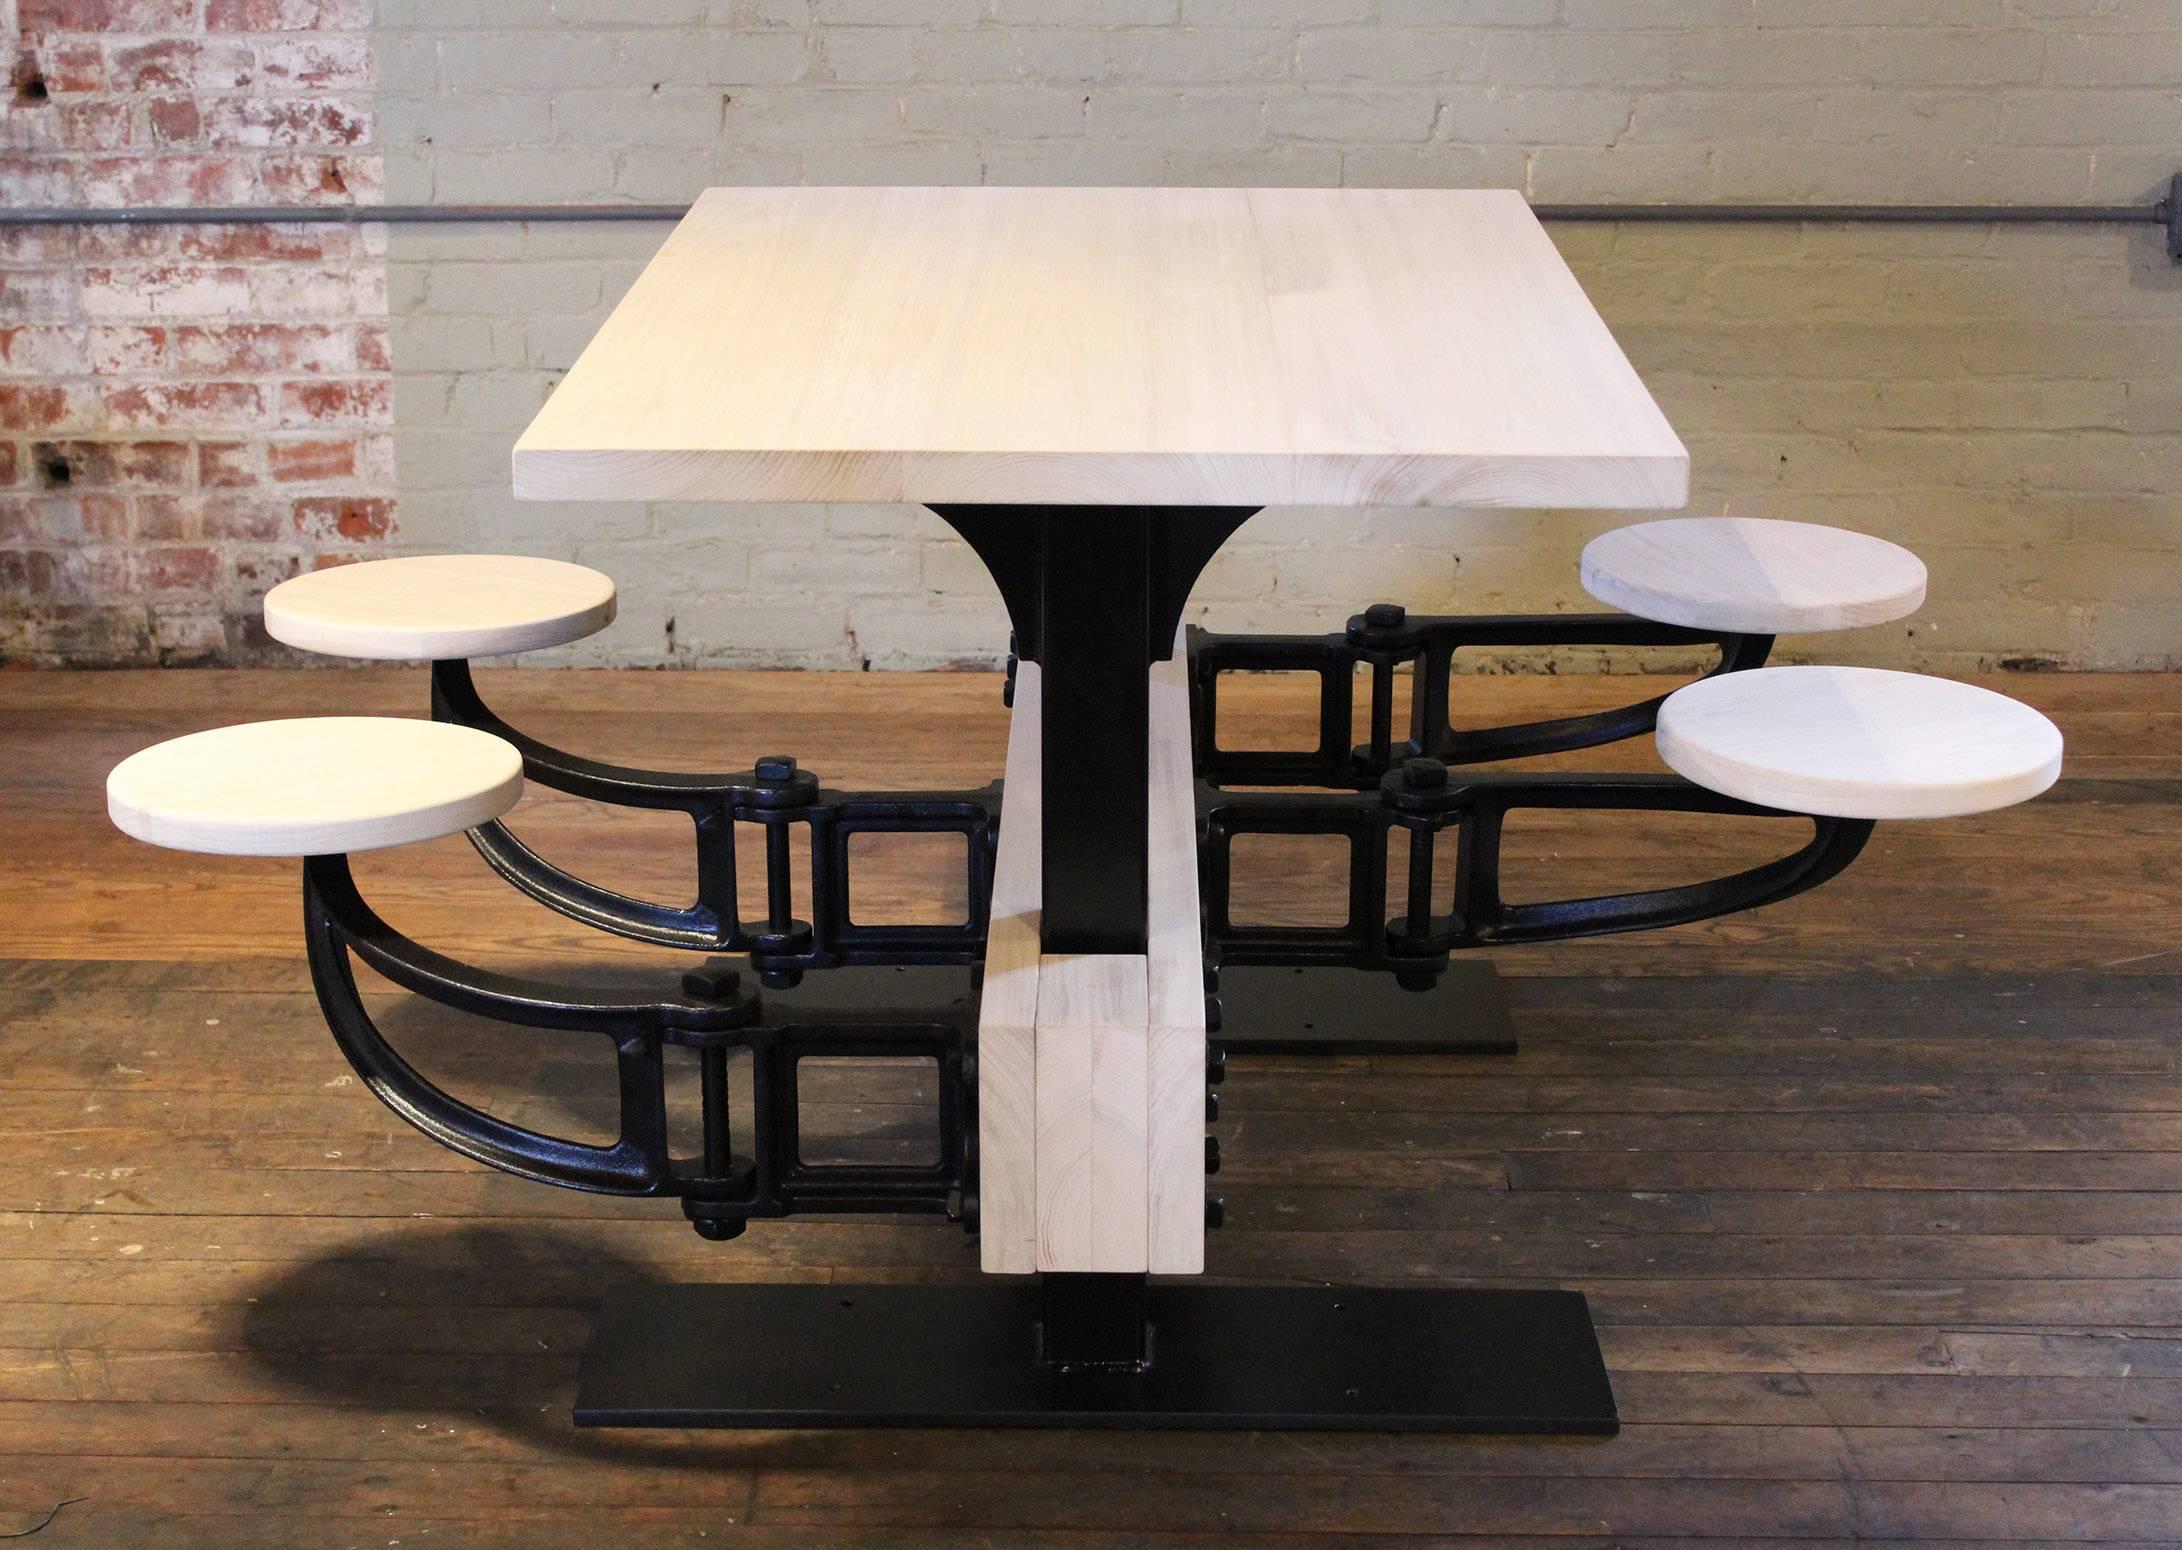 Vintage industrial cast iron, steel and wood swing out seat cafeteria style dining kitchen table. Top measures 1 1/4